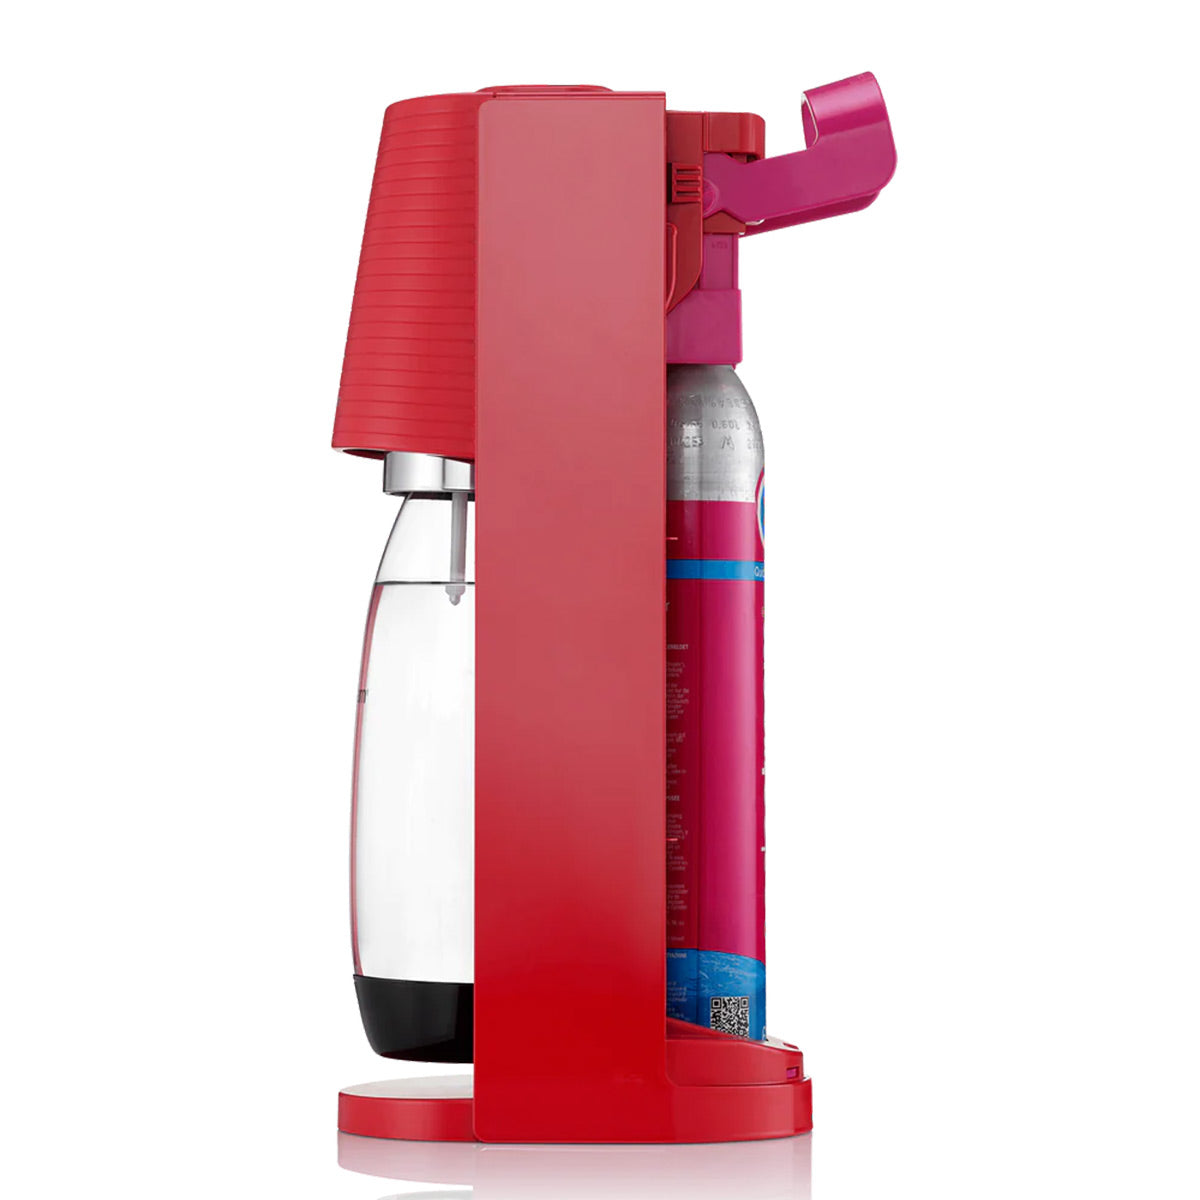 SodaStream Terra Sparkling Water Maker with Dishwasher Safe Bottle and Quick Connect CO2 Cylinder (Red)